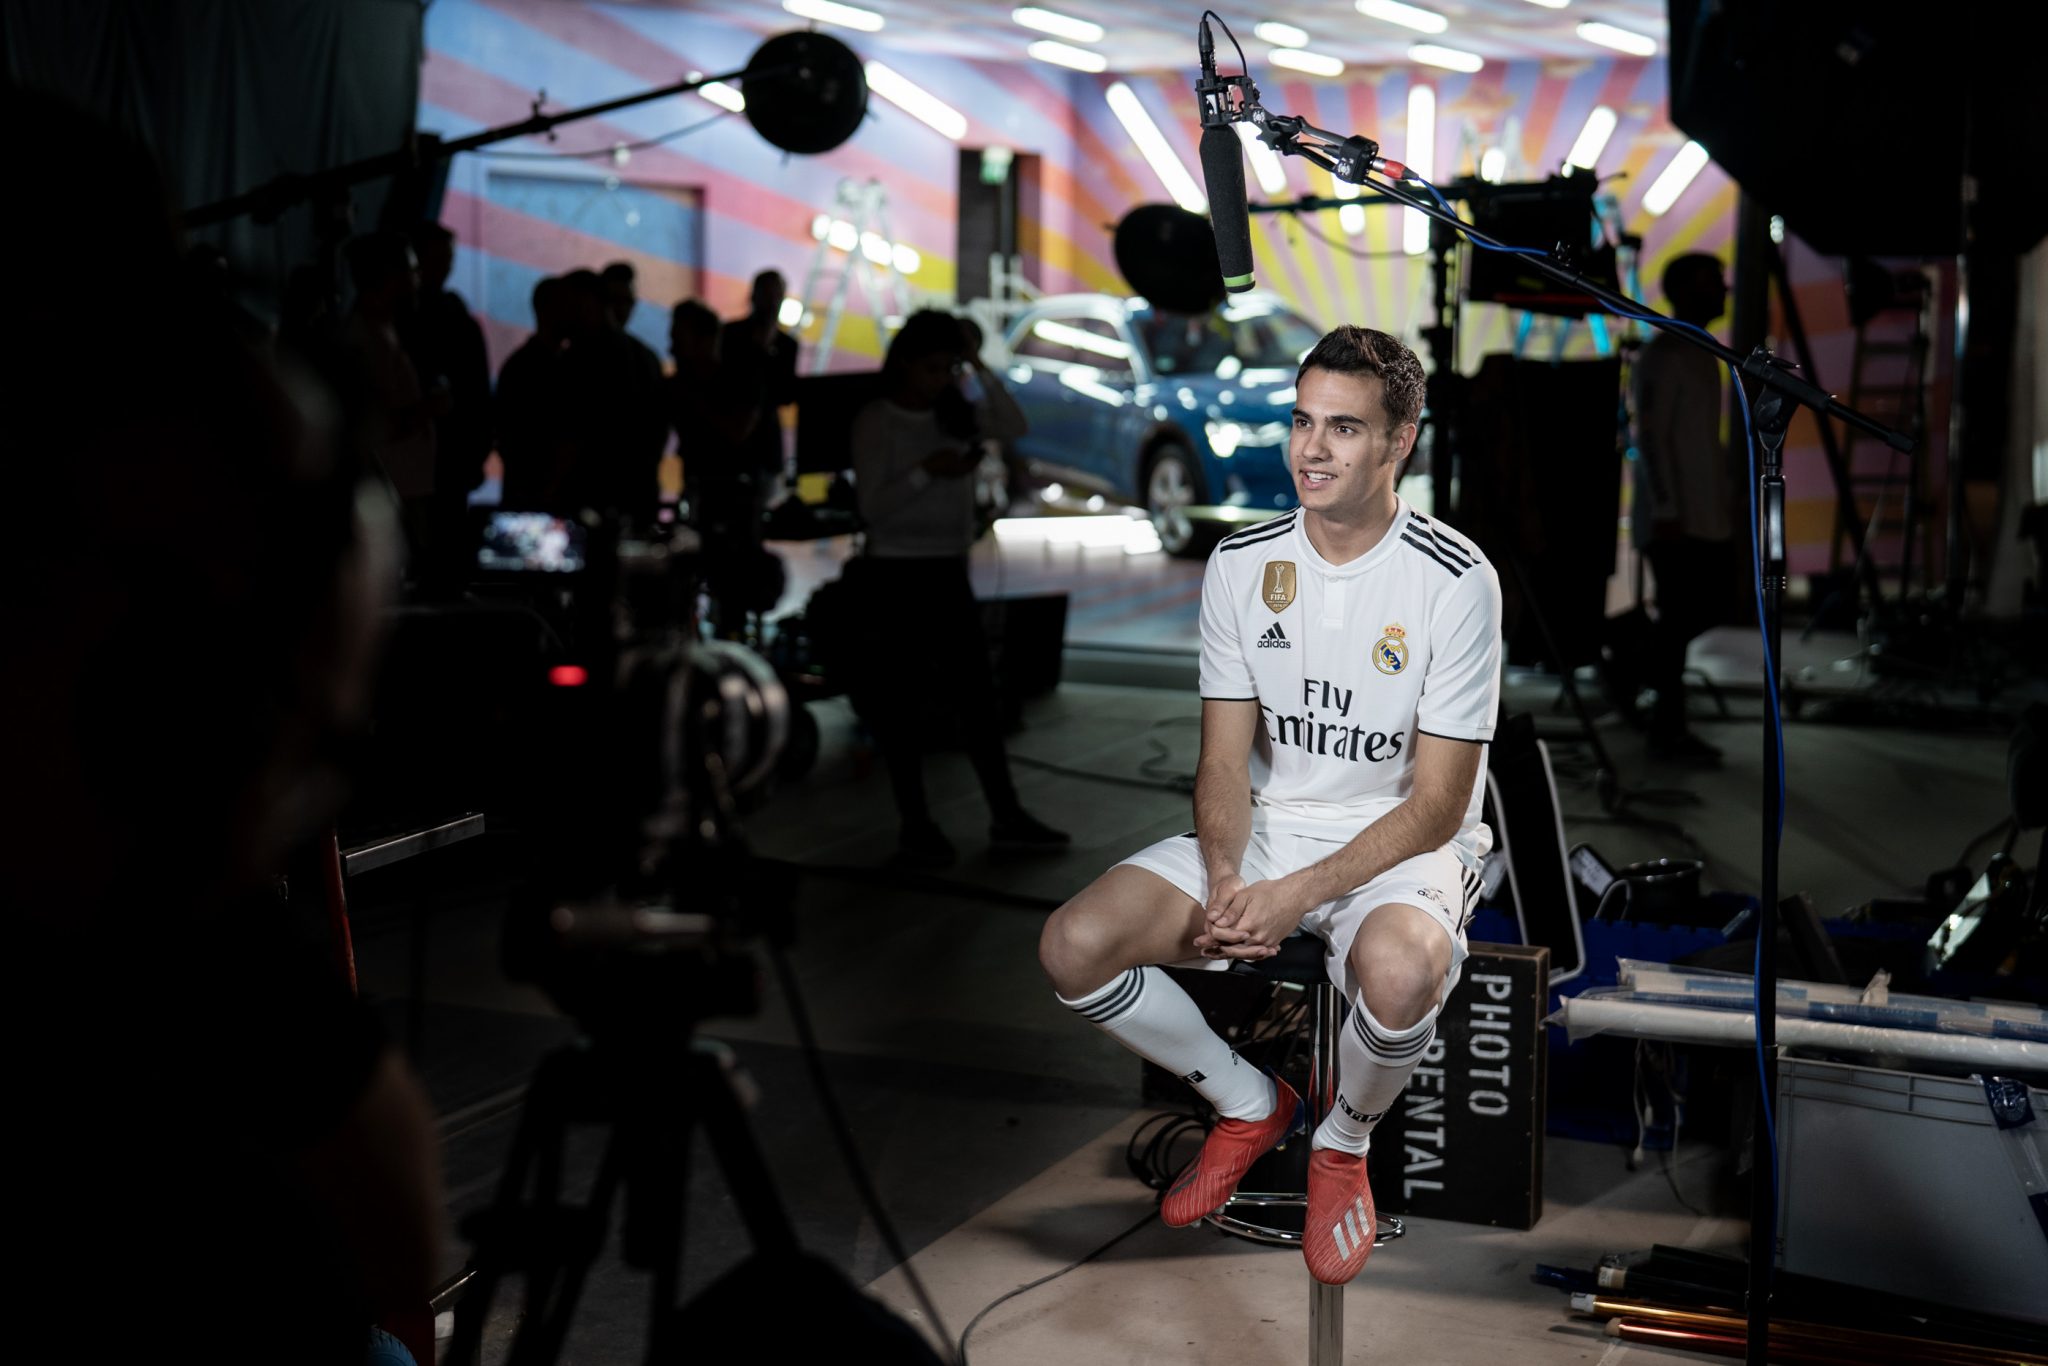 David LaChapelle | Audi x Real Madrid | Behind-the-scenes photographs from the Audi E-tron launch shoot in Madrid. | 25